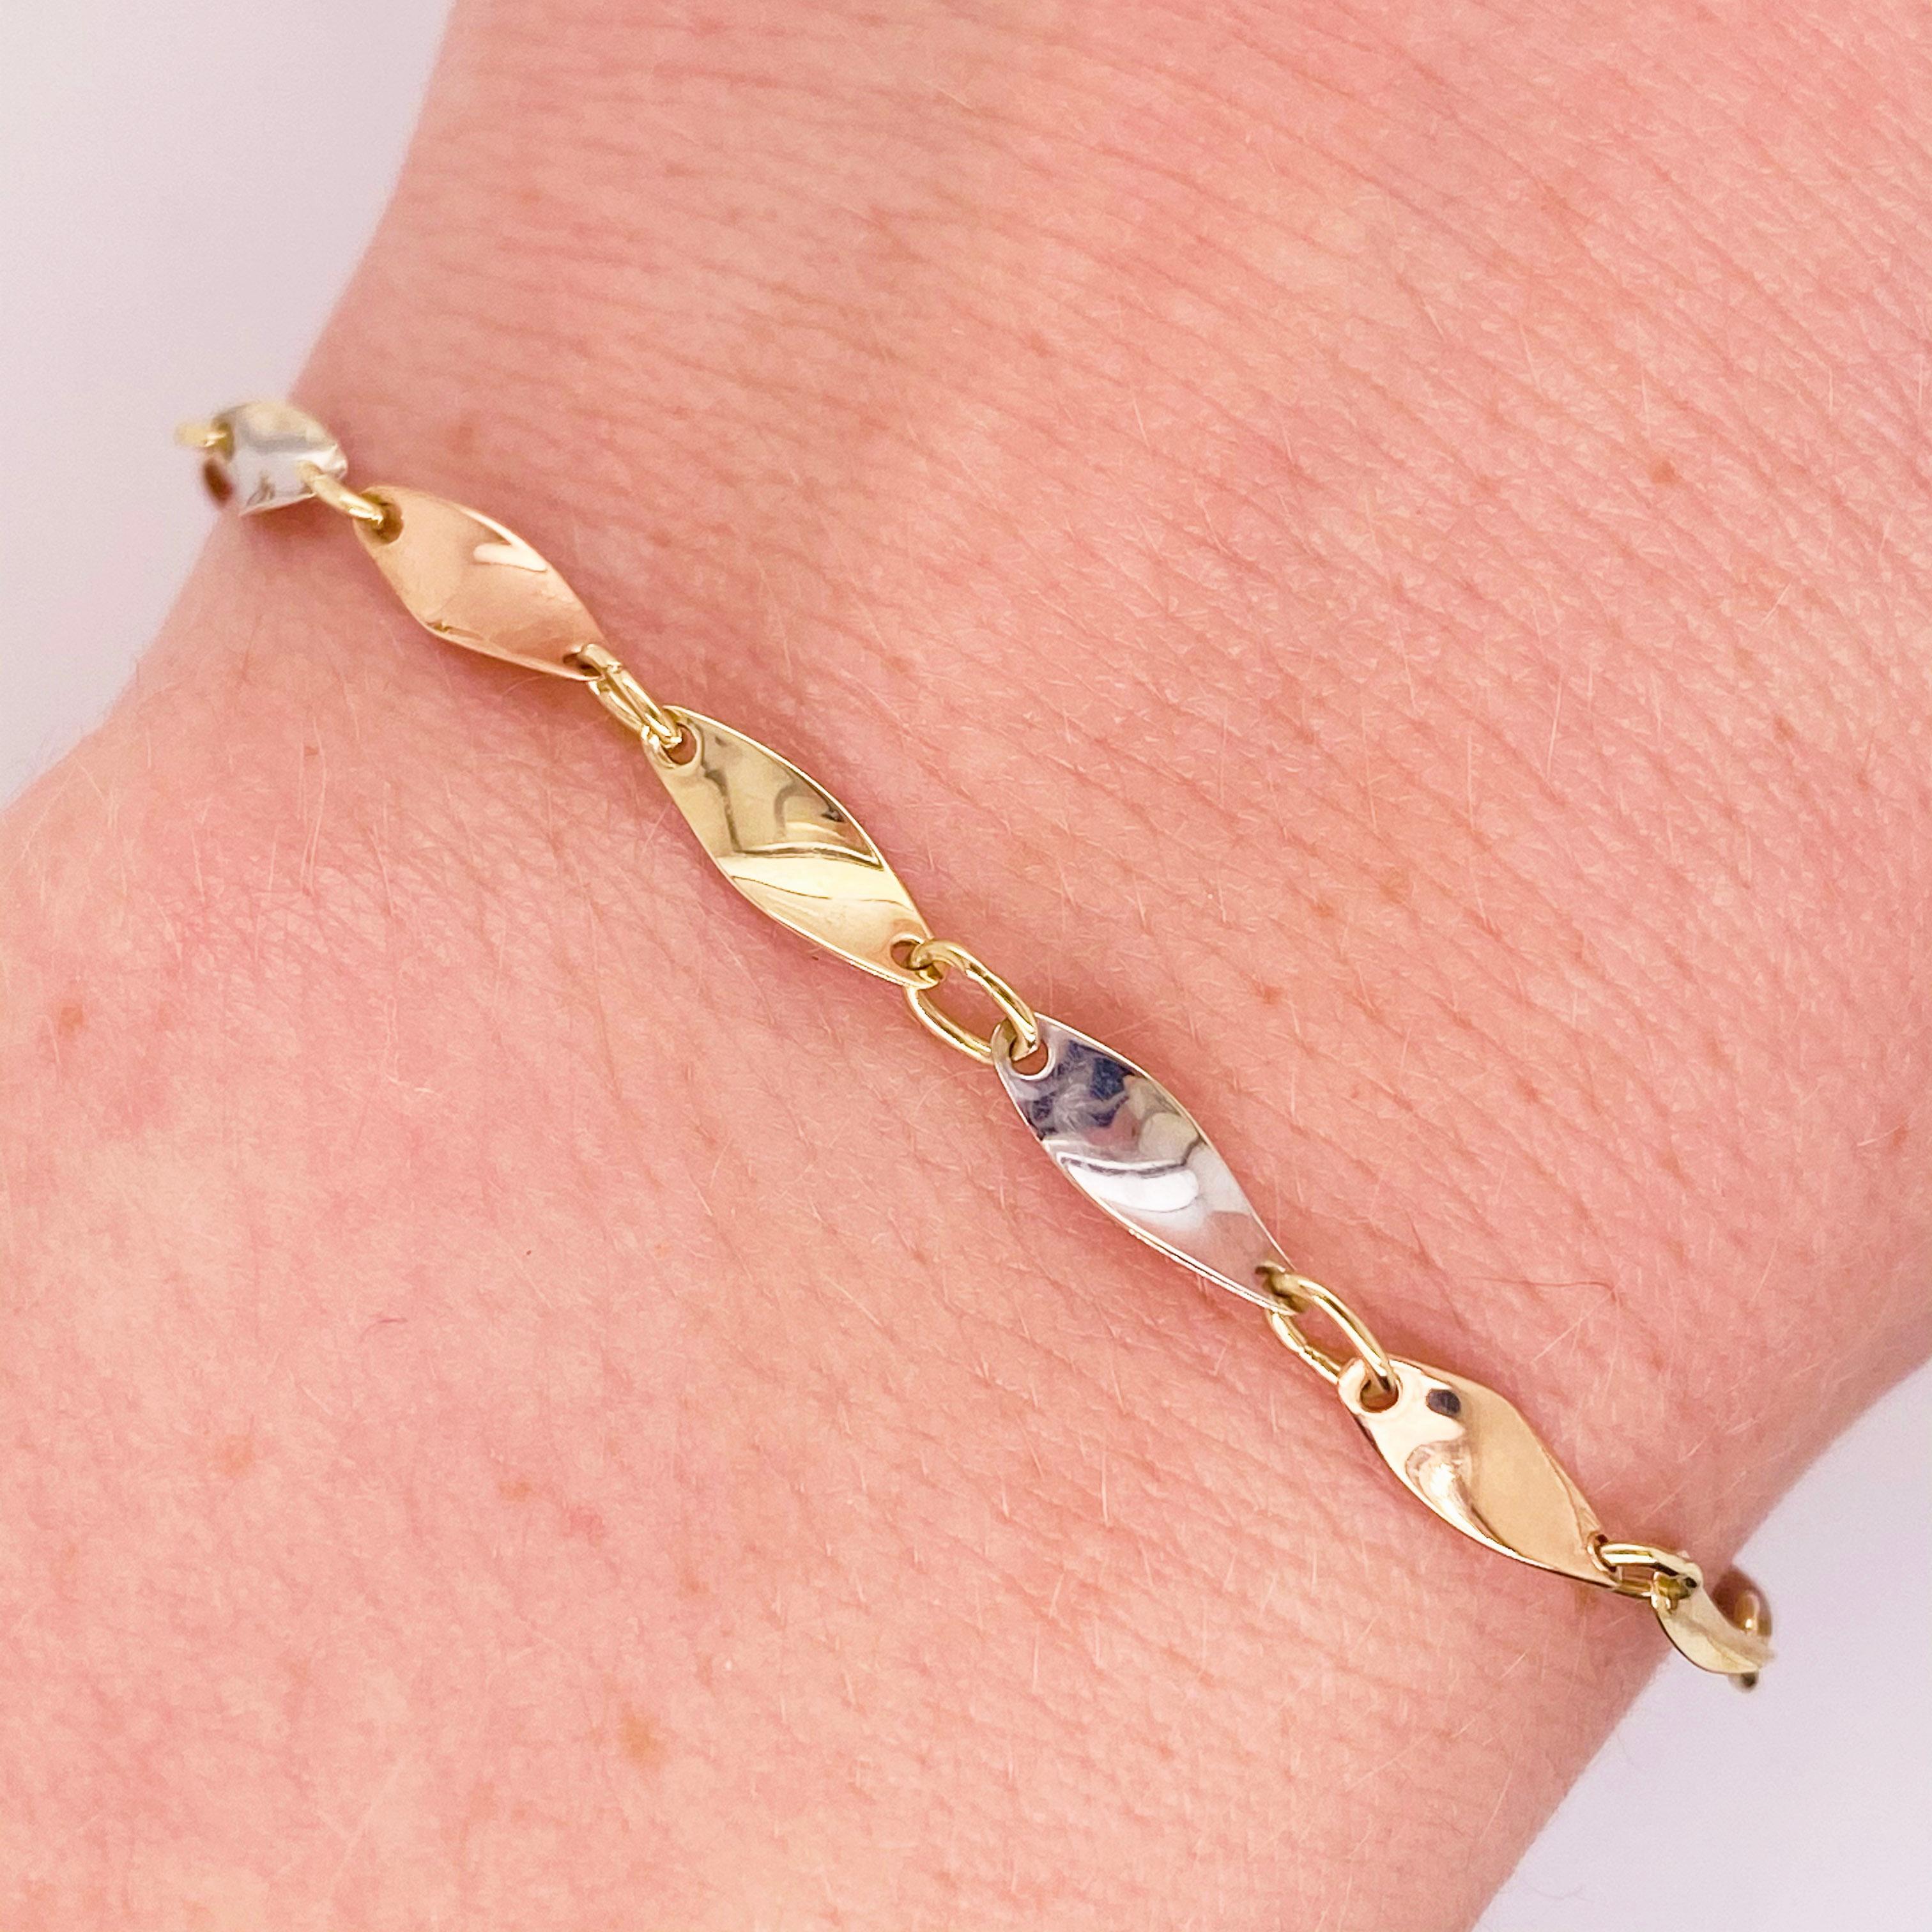 This is a handmade tri-color gold bracelet made with 3 gold colored links. The tri-color gold bracelet has a fun twisted design made with 14 karat rose, white and yellow gold. Each link was handmade and put together to create a beautiful fine